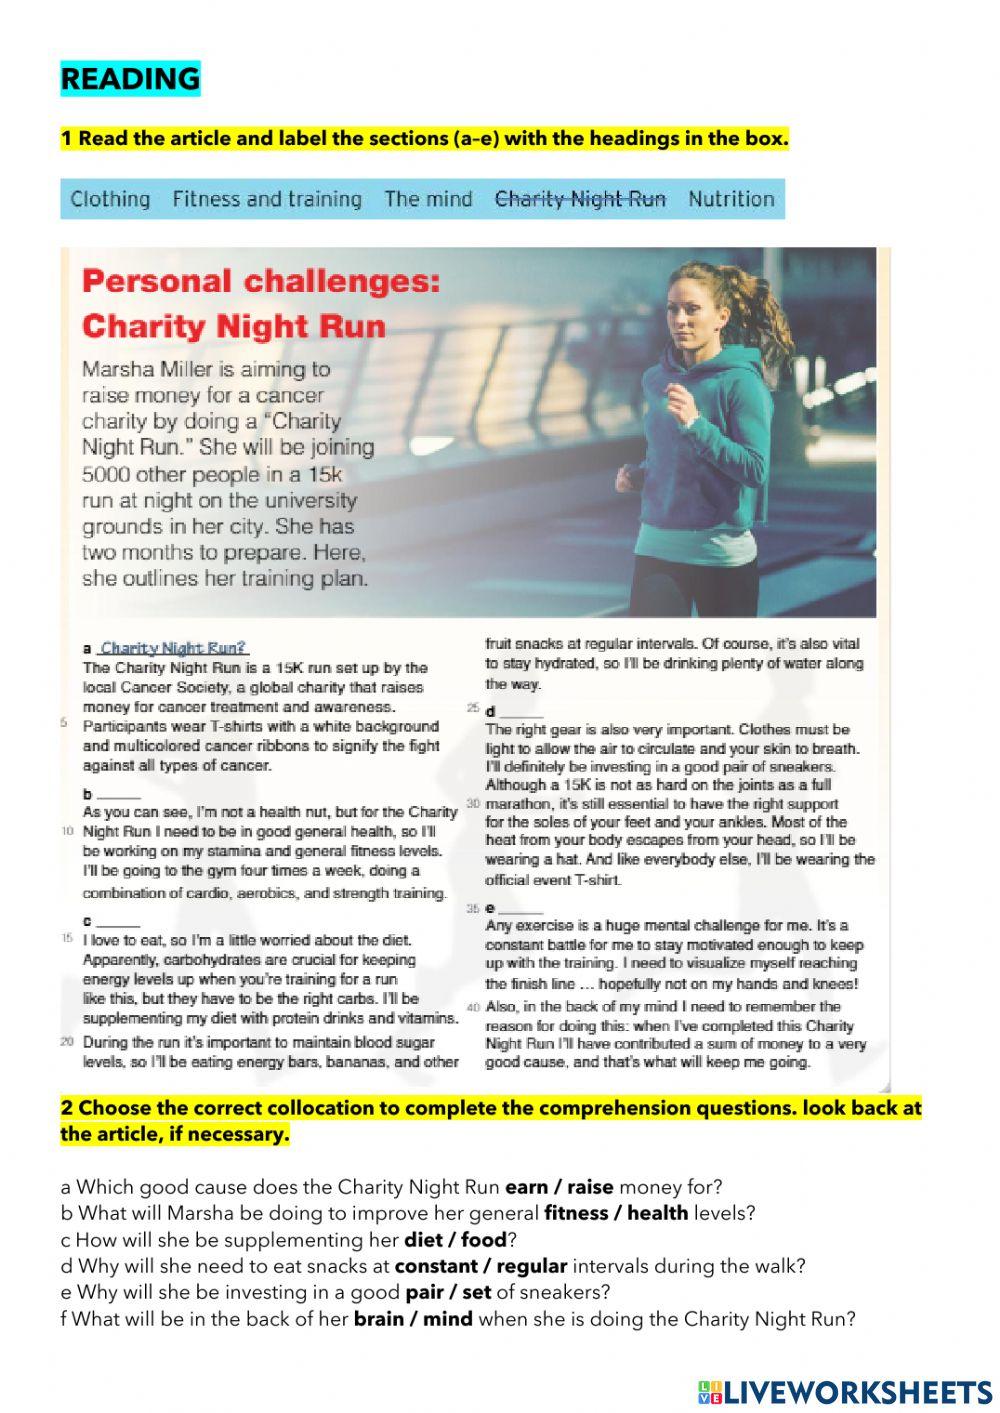 Personal challenges: Charity Night Run